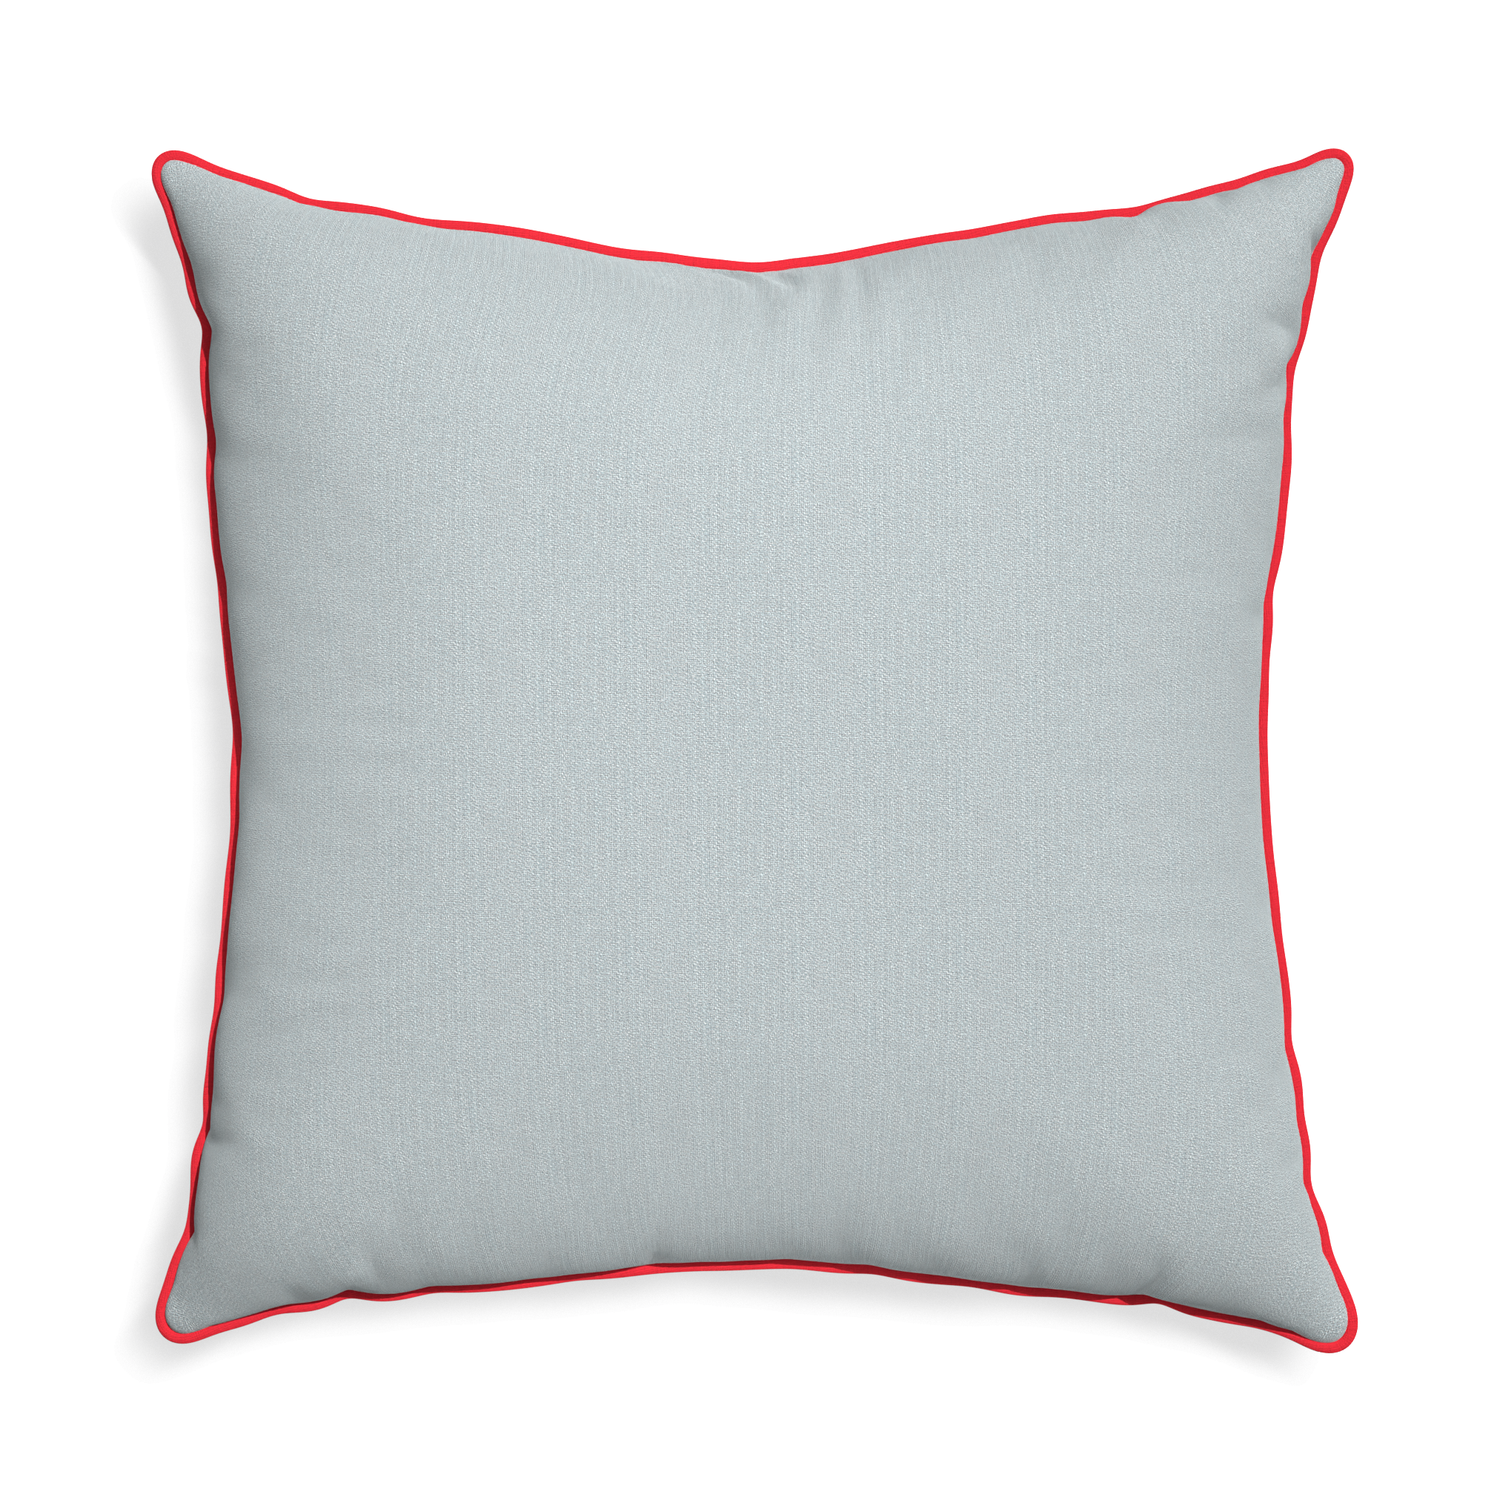 Euro-sham sea custom grey bluepillow with cherry piping on white background